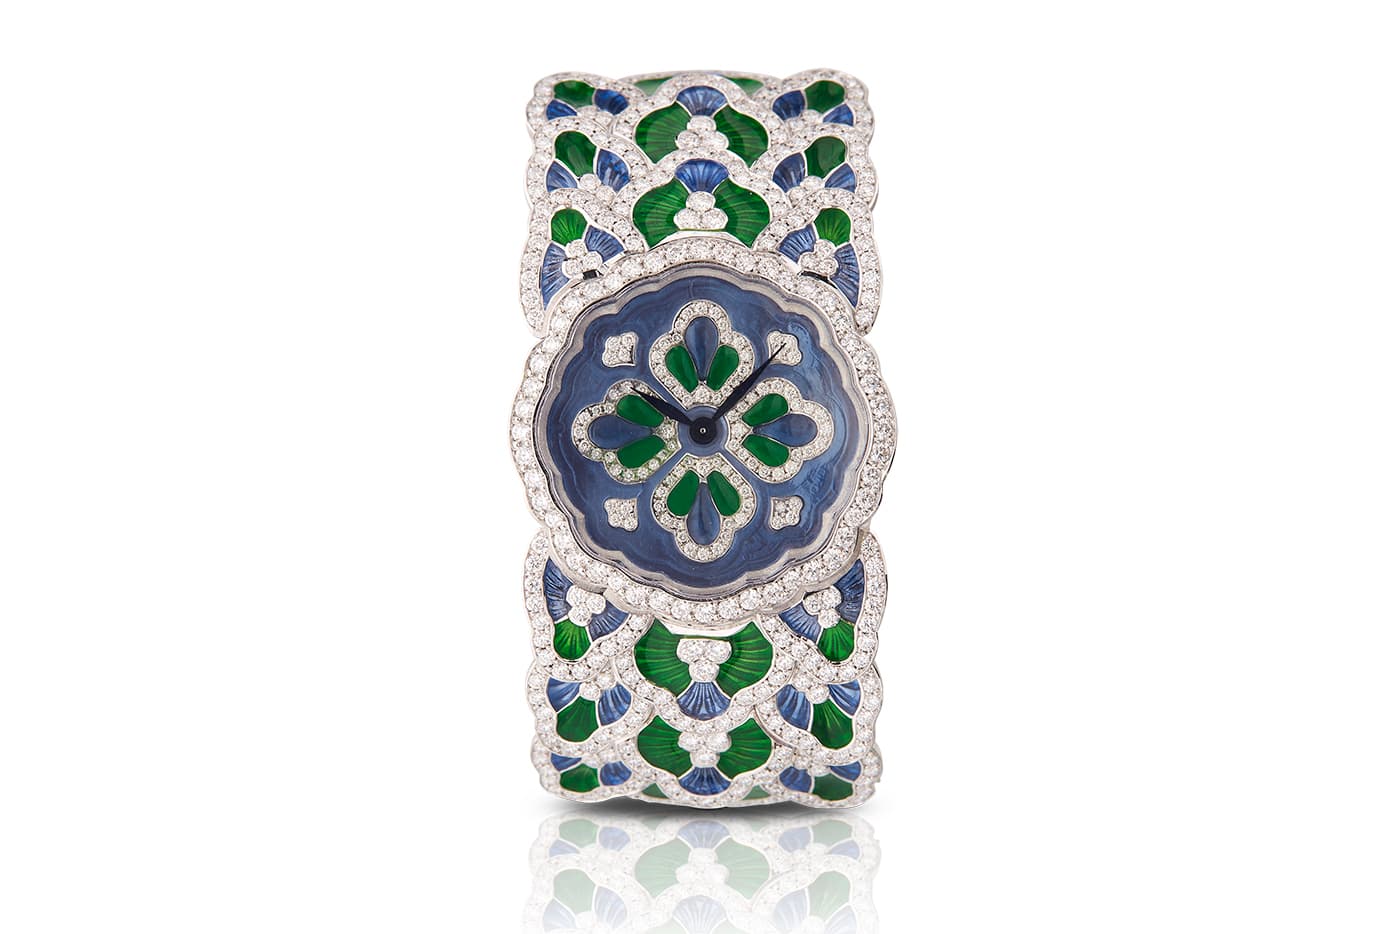 Buccellati 'Bluebell' watch with 11.35ct diamonds and guilloché enamel on white gold